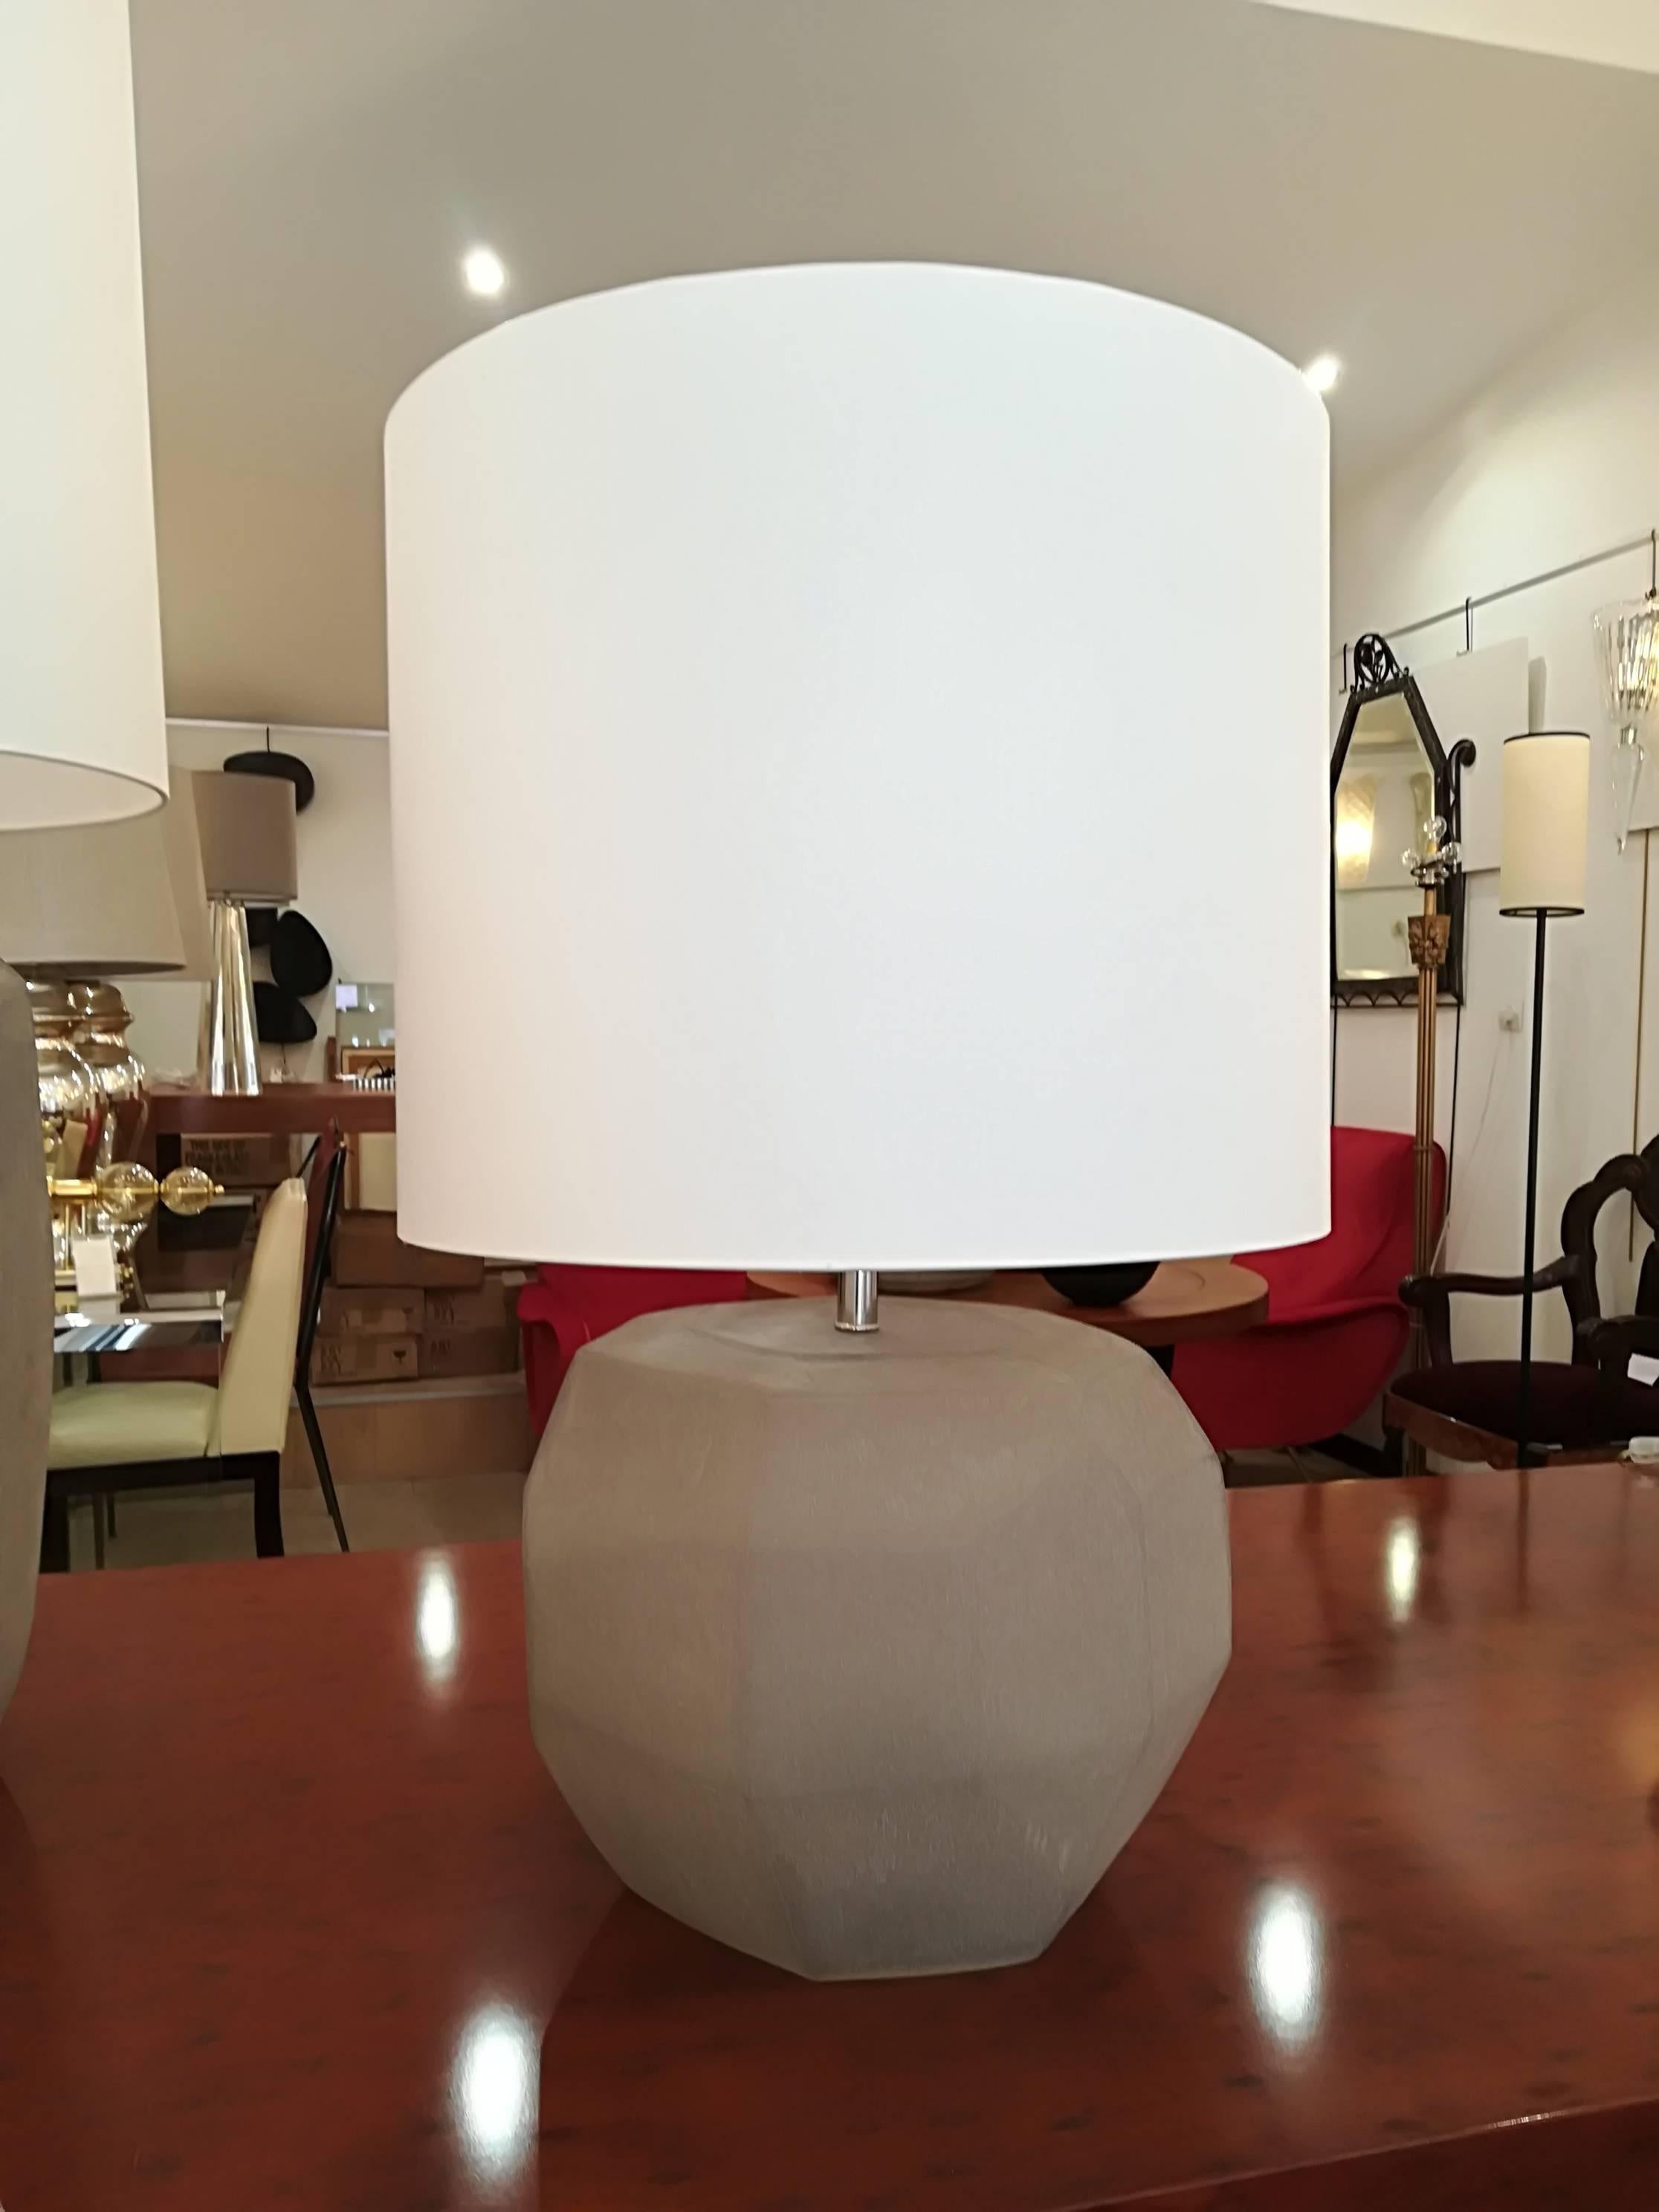 Beautiful grey frosted glass table lamp,
excellent condition, provided with elegant white lampshade
Dim lamp stand only: 42cm.